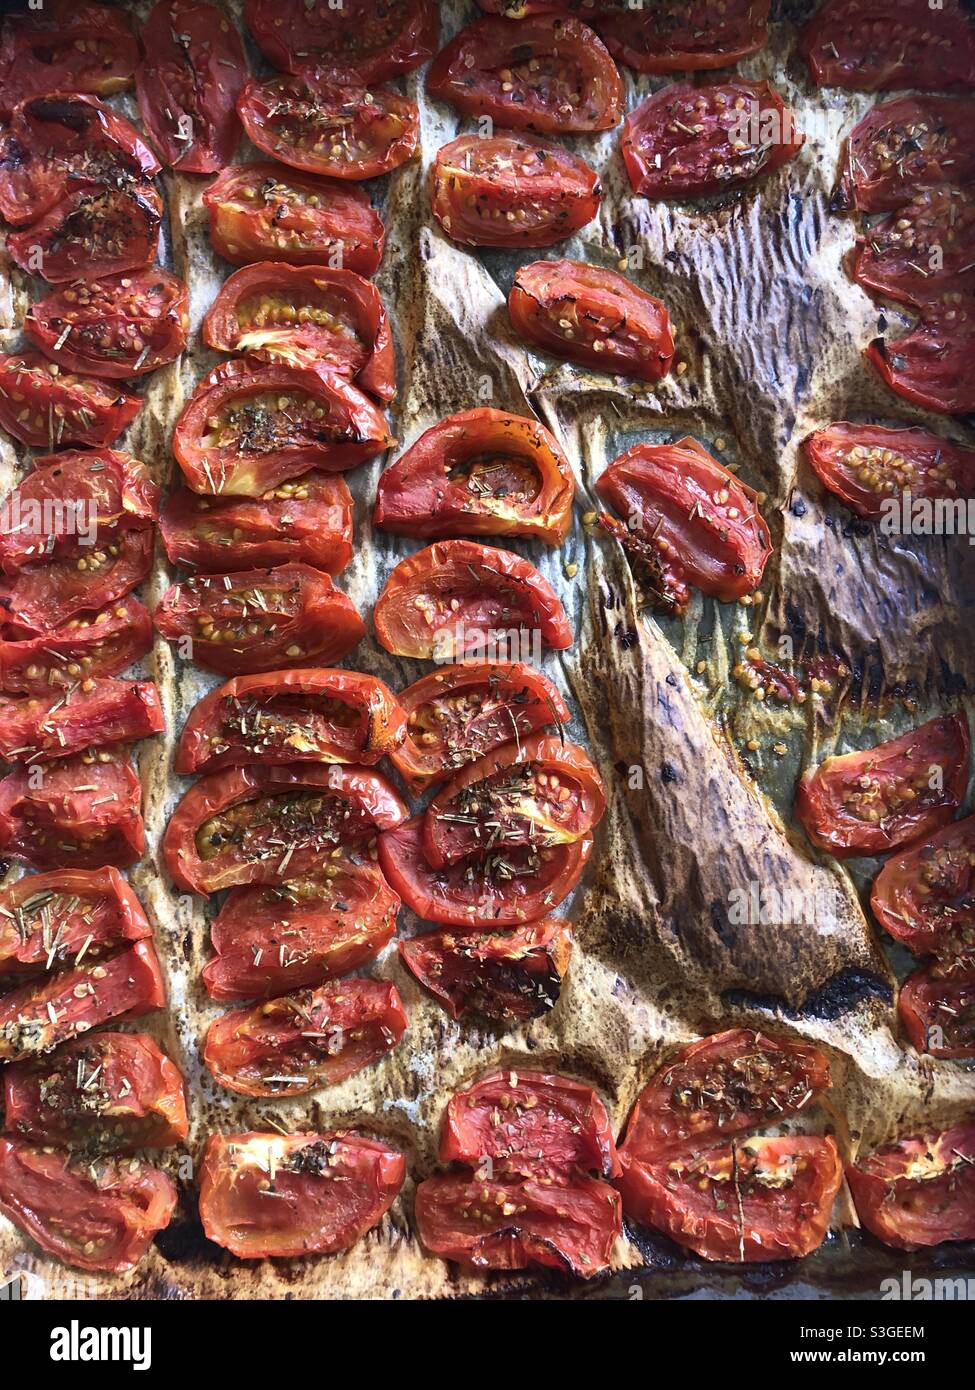 Oven roasted tomatoes served with herbs Stock Photo